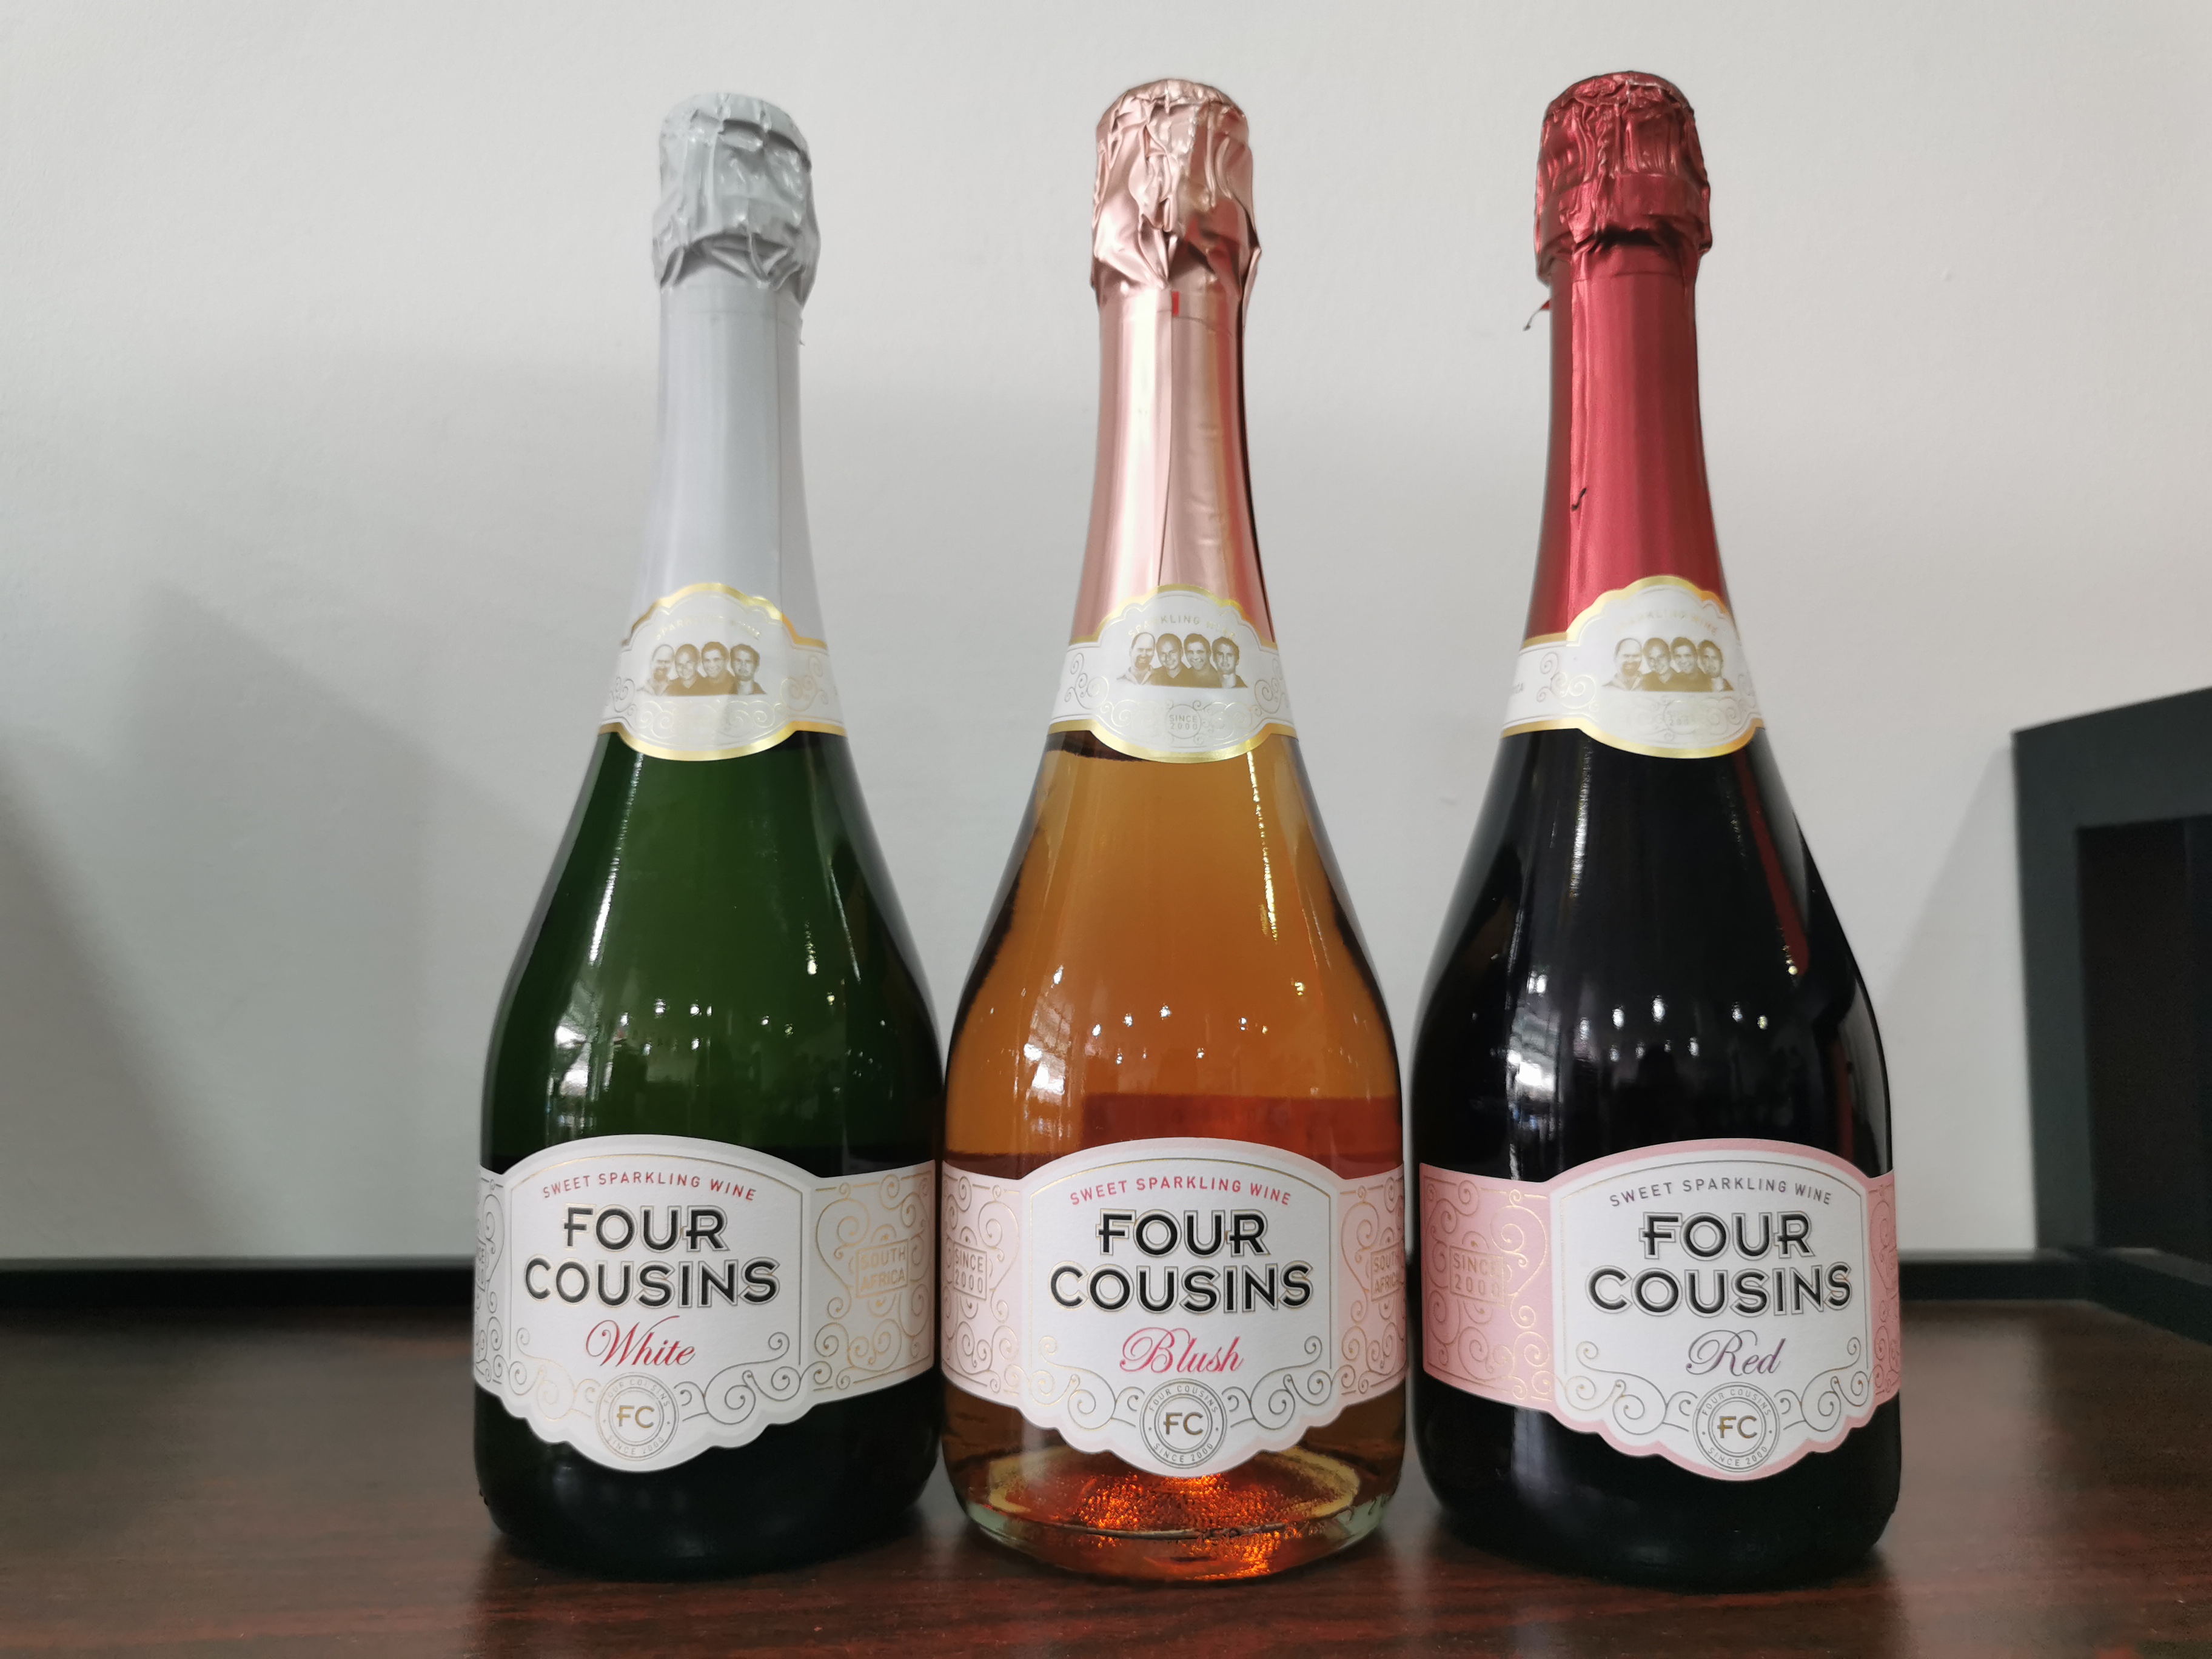 FOUR COUSINS SWEET SPARKLING WINE RED南非四兄弟玫瑰红起泡酒-图2